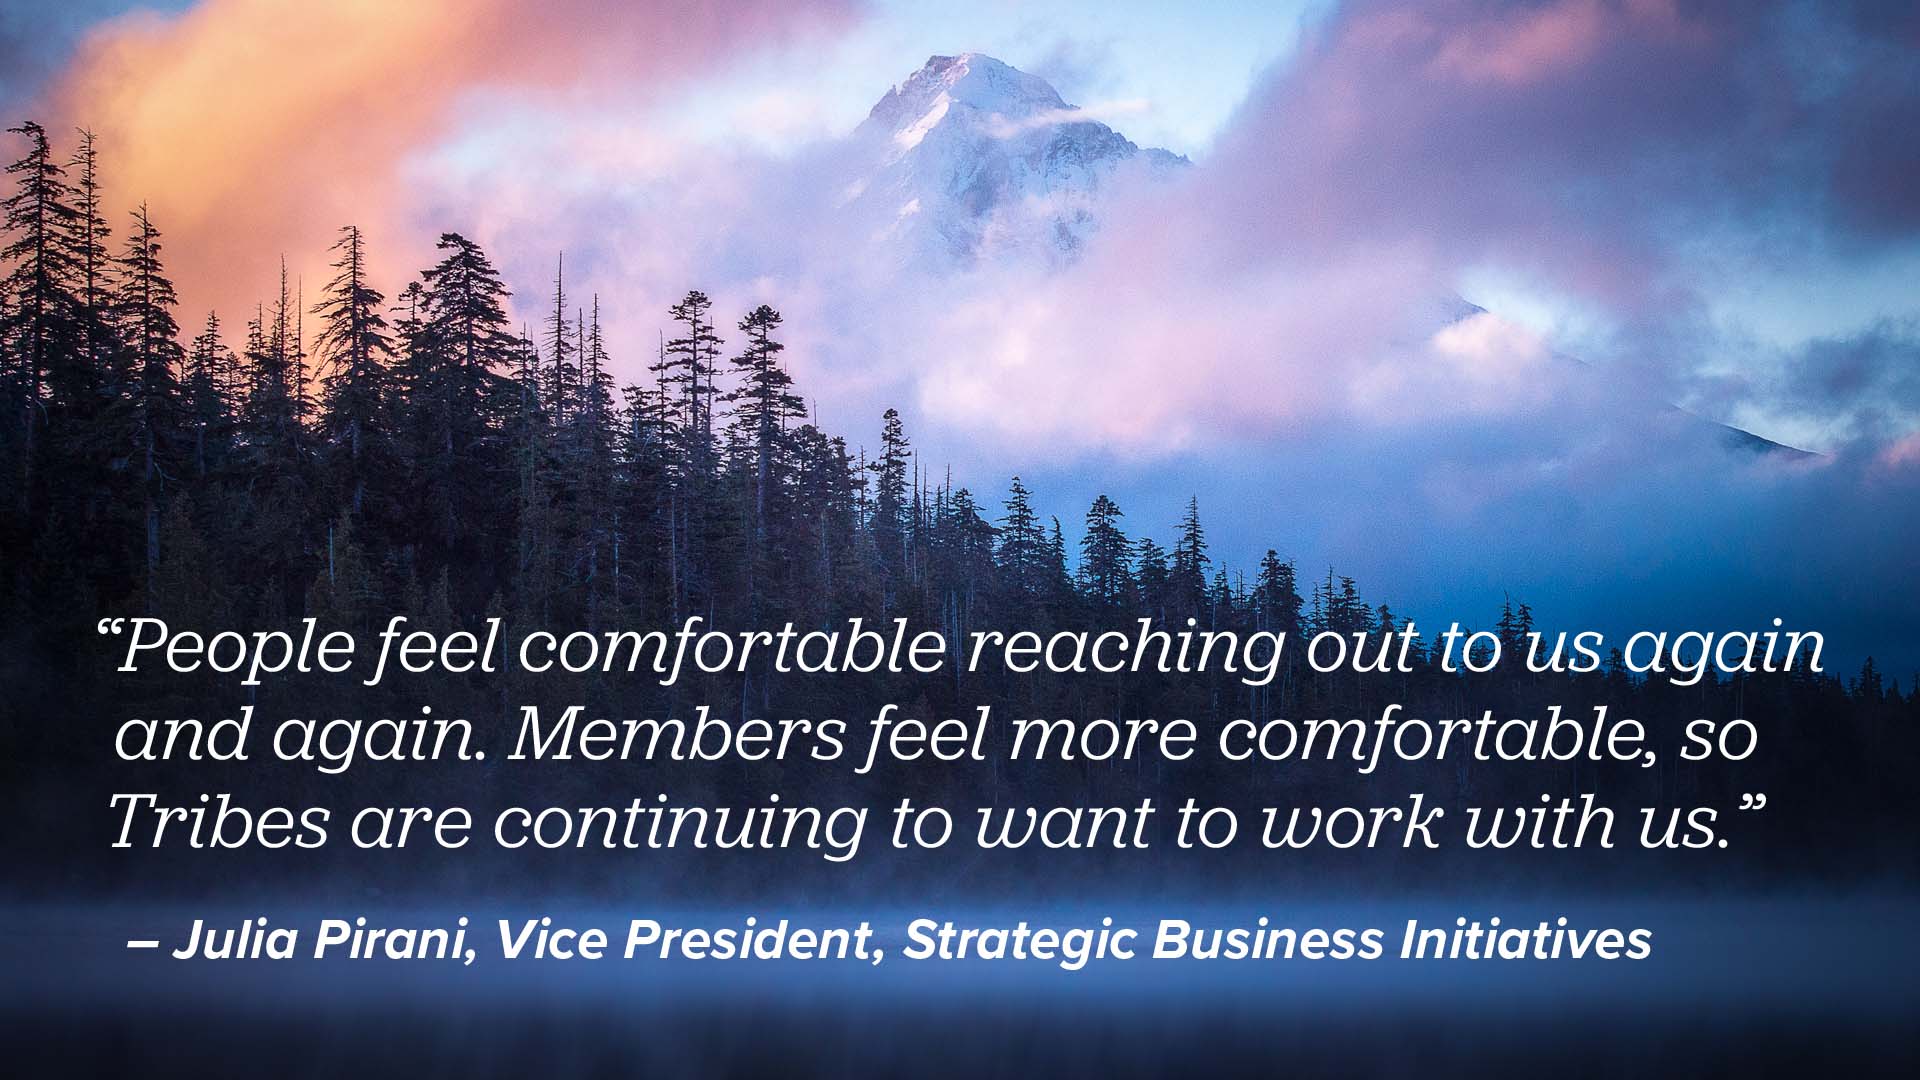 A landscape image of Mt. Hood covered by clouds and trees with a quote from Julia Pirani, Vice President of Strategic Business Initiatives, that reads: People feel comfortable reaching out to us again and again. Members feel more comfortable, so Tribes are continuing to want to work with us.